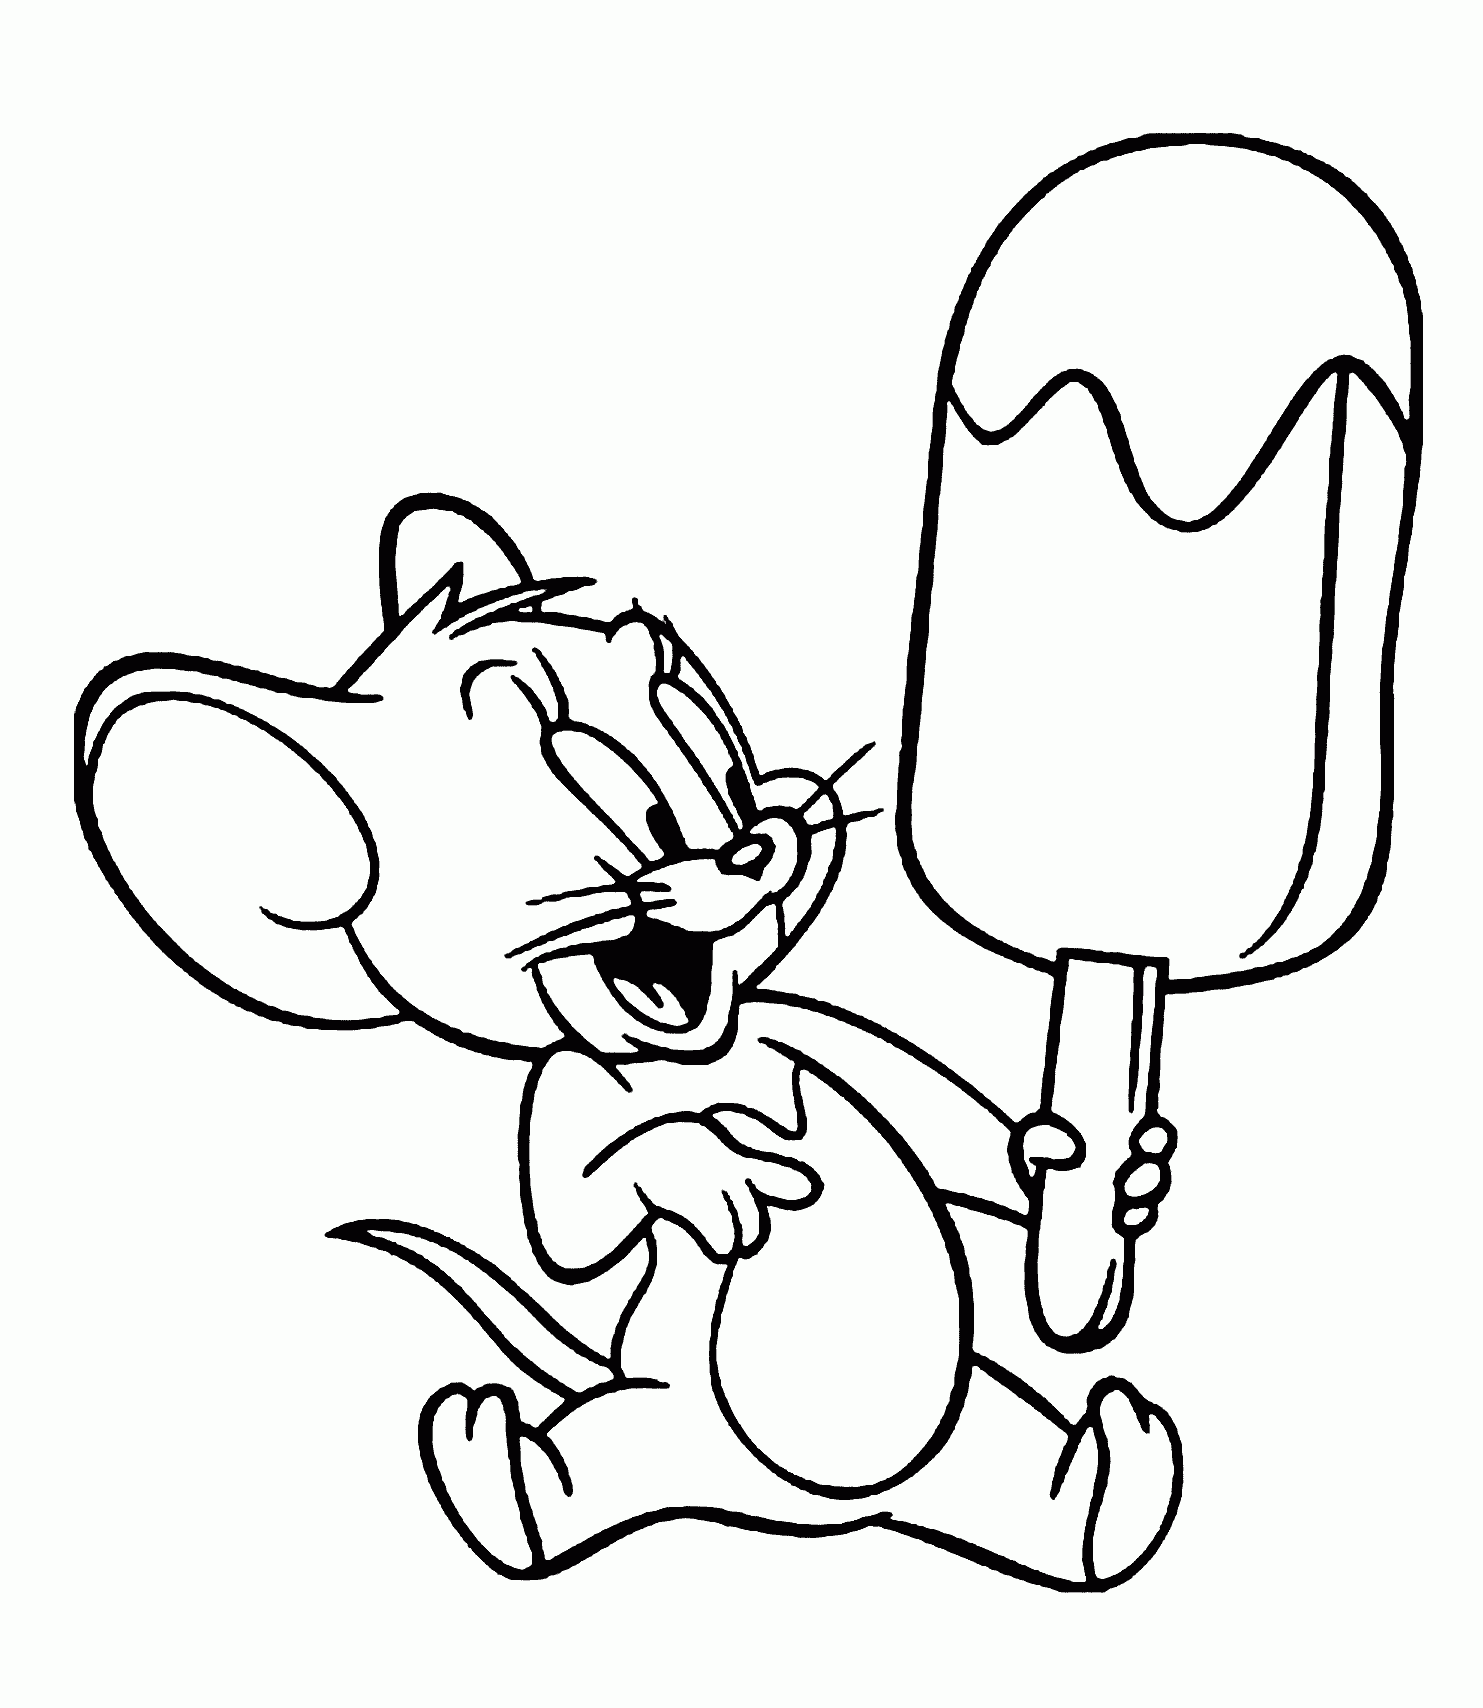 Related Tom And Jerry Coloring Pages item-14065, Tom And Jerry ...